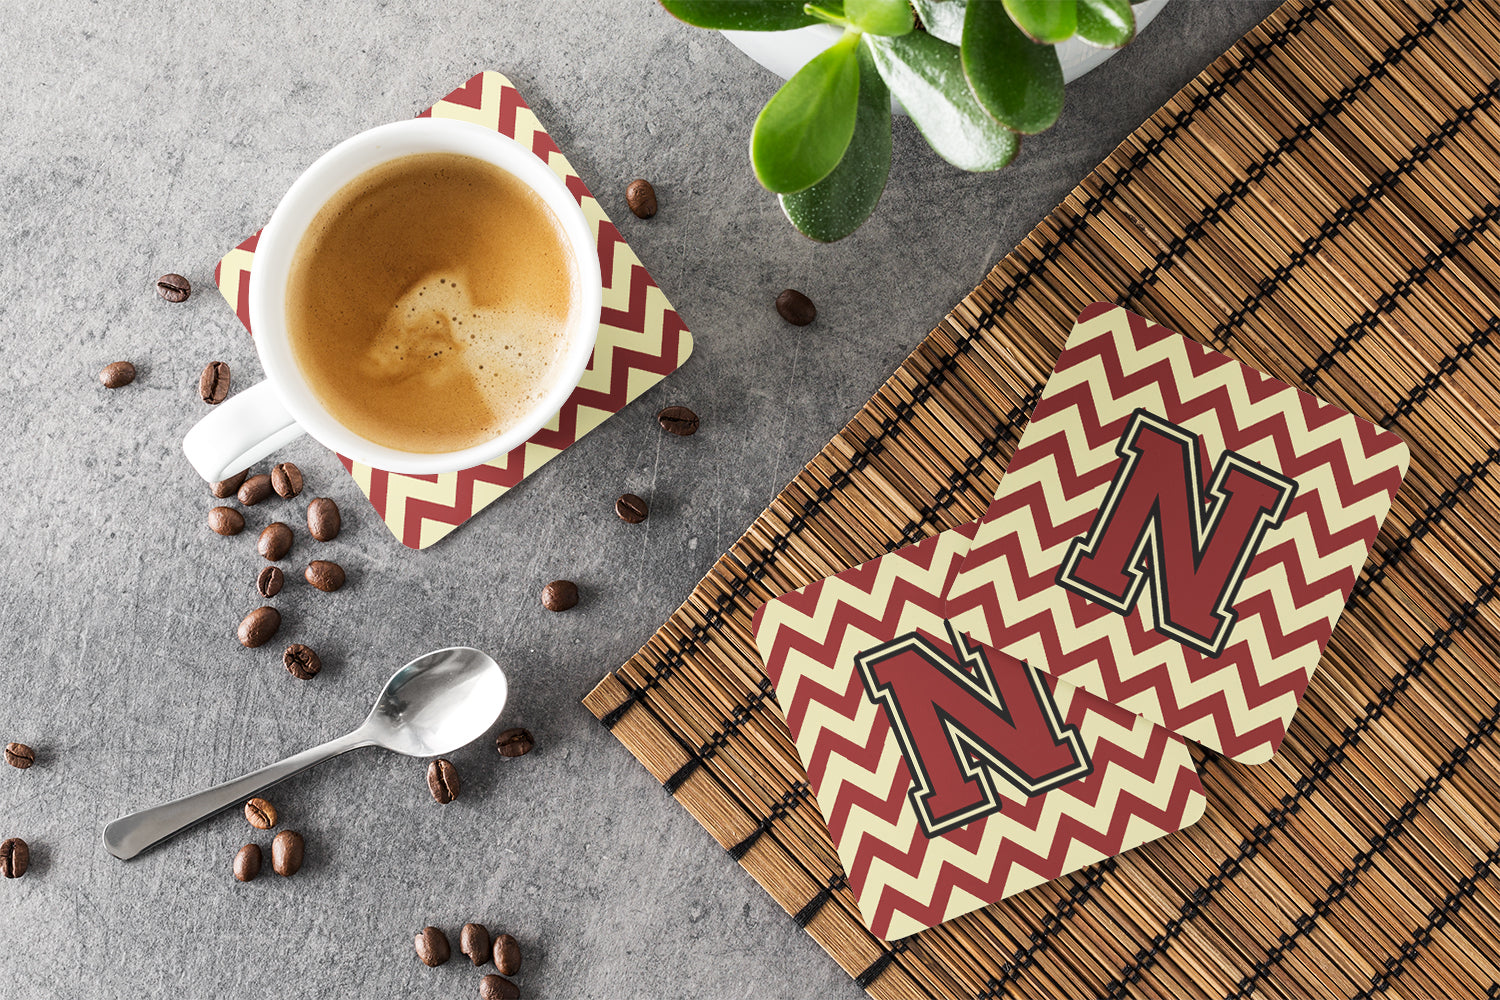 Letter N Chevron Maroon and Gold Foam Coaster Set of 4 CJ1061-NFC - the-store.com